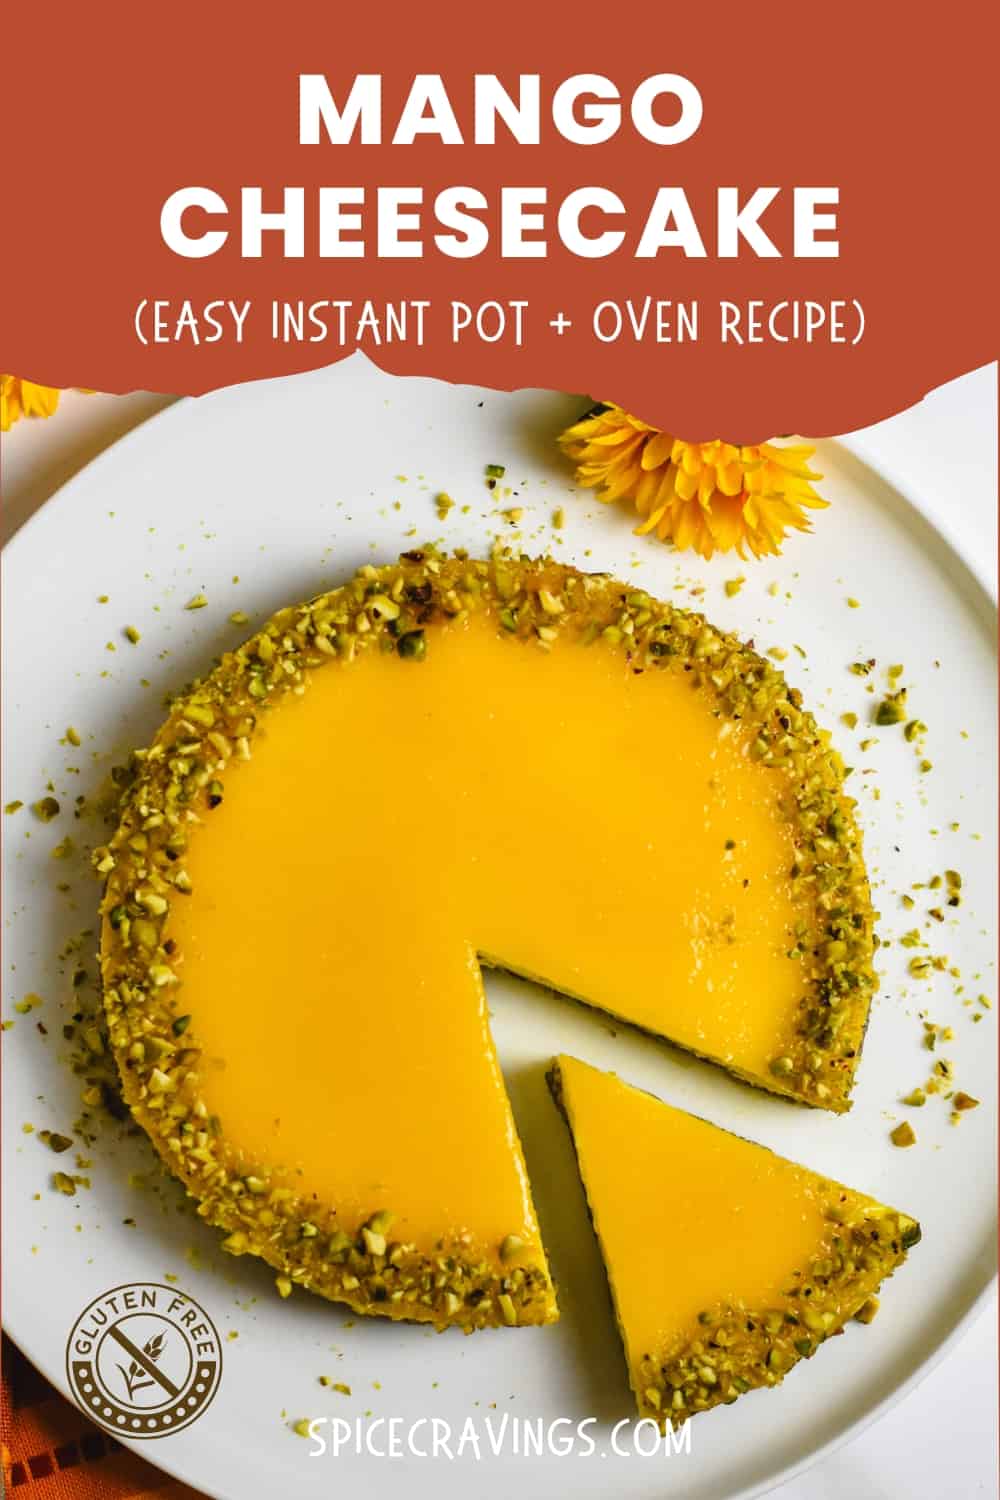 Top shot of Indian Instant Pot Mango cheesecake with sunflowers on the side